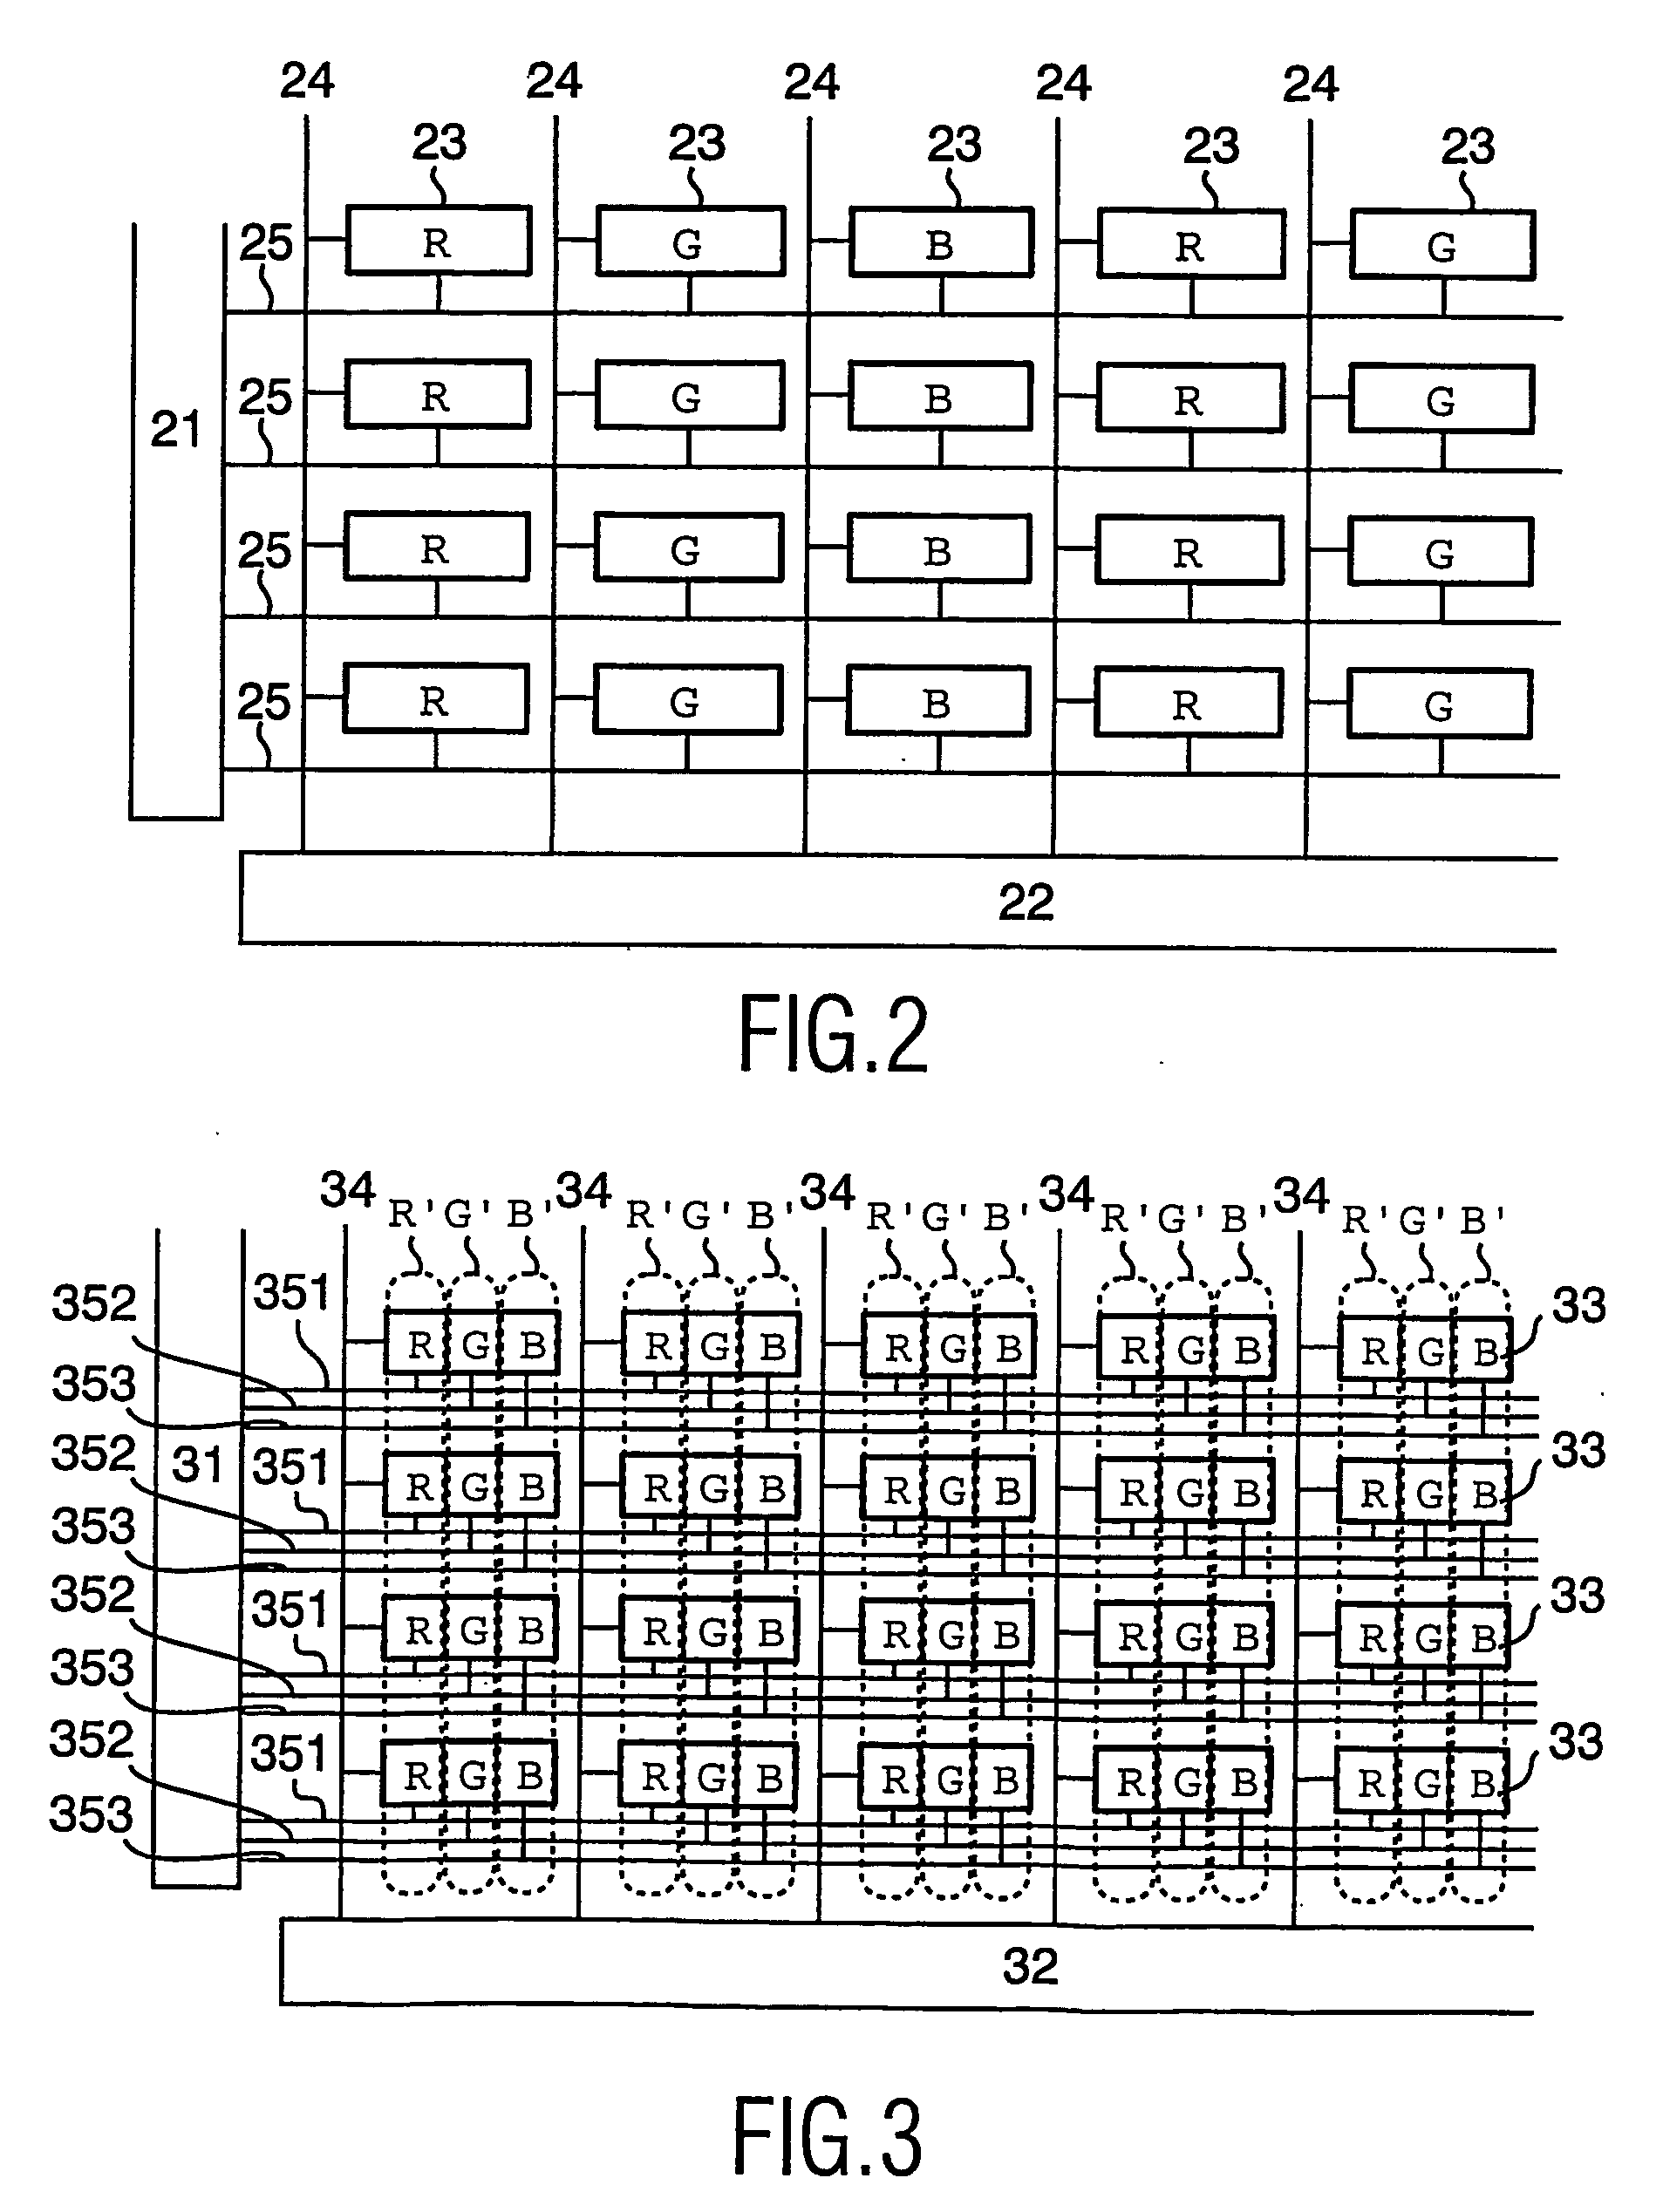 Active matrix display with variable duty cycle